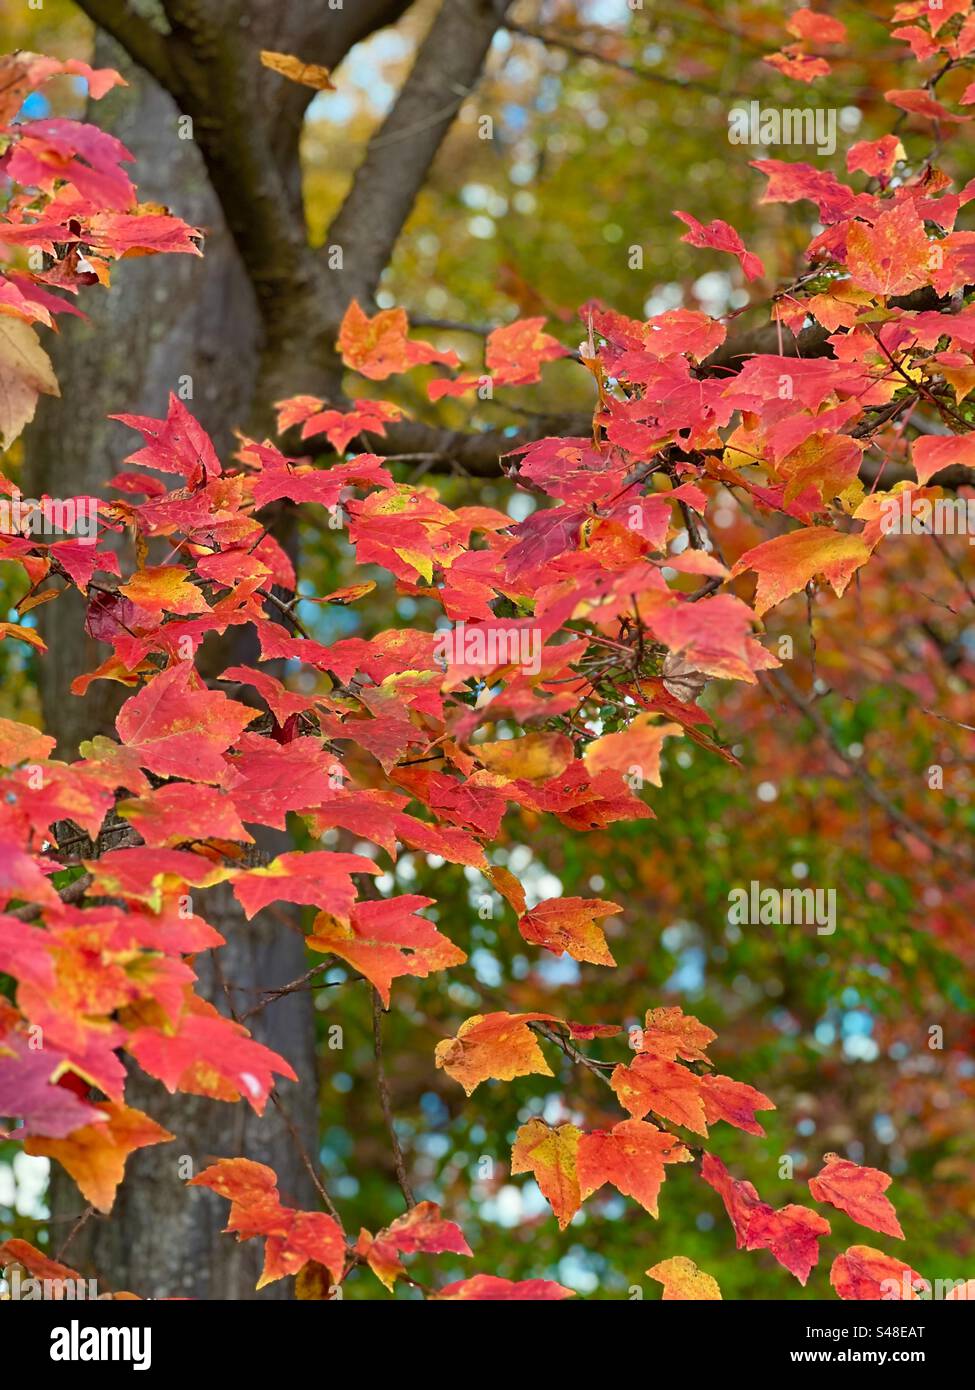 Bright red leaves with orange and gold accents. Autumn Stock Photo